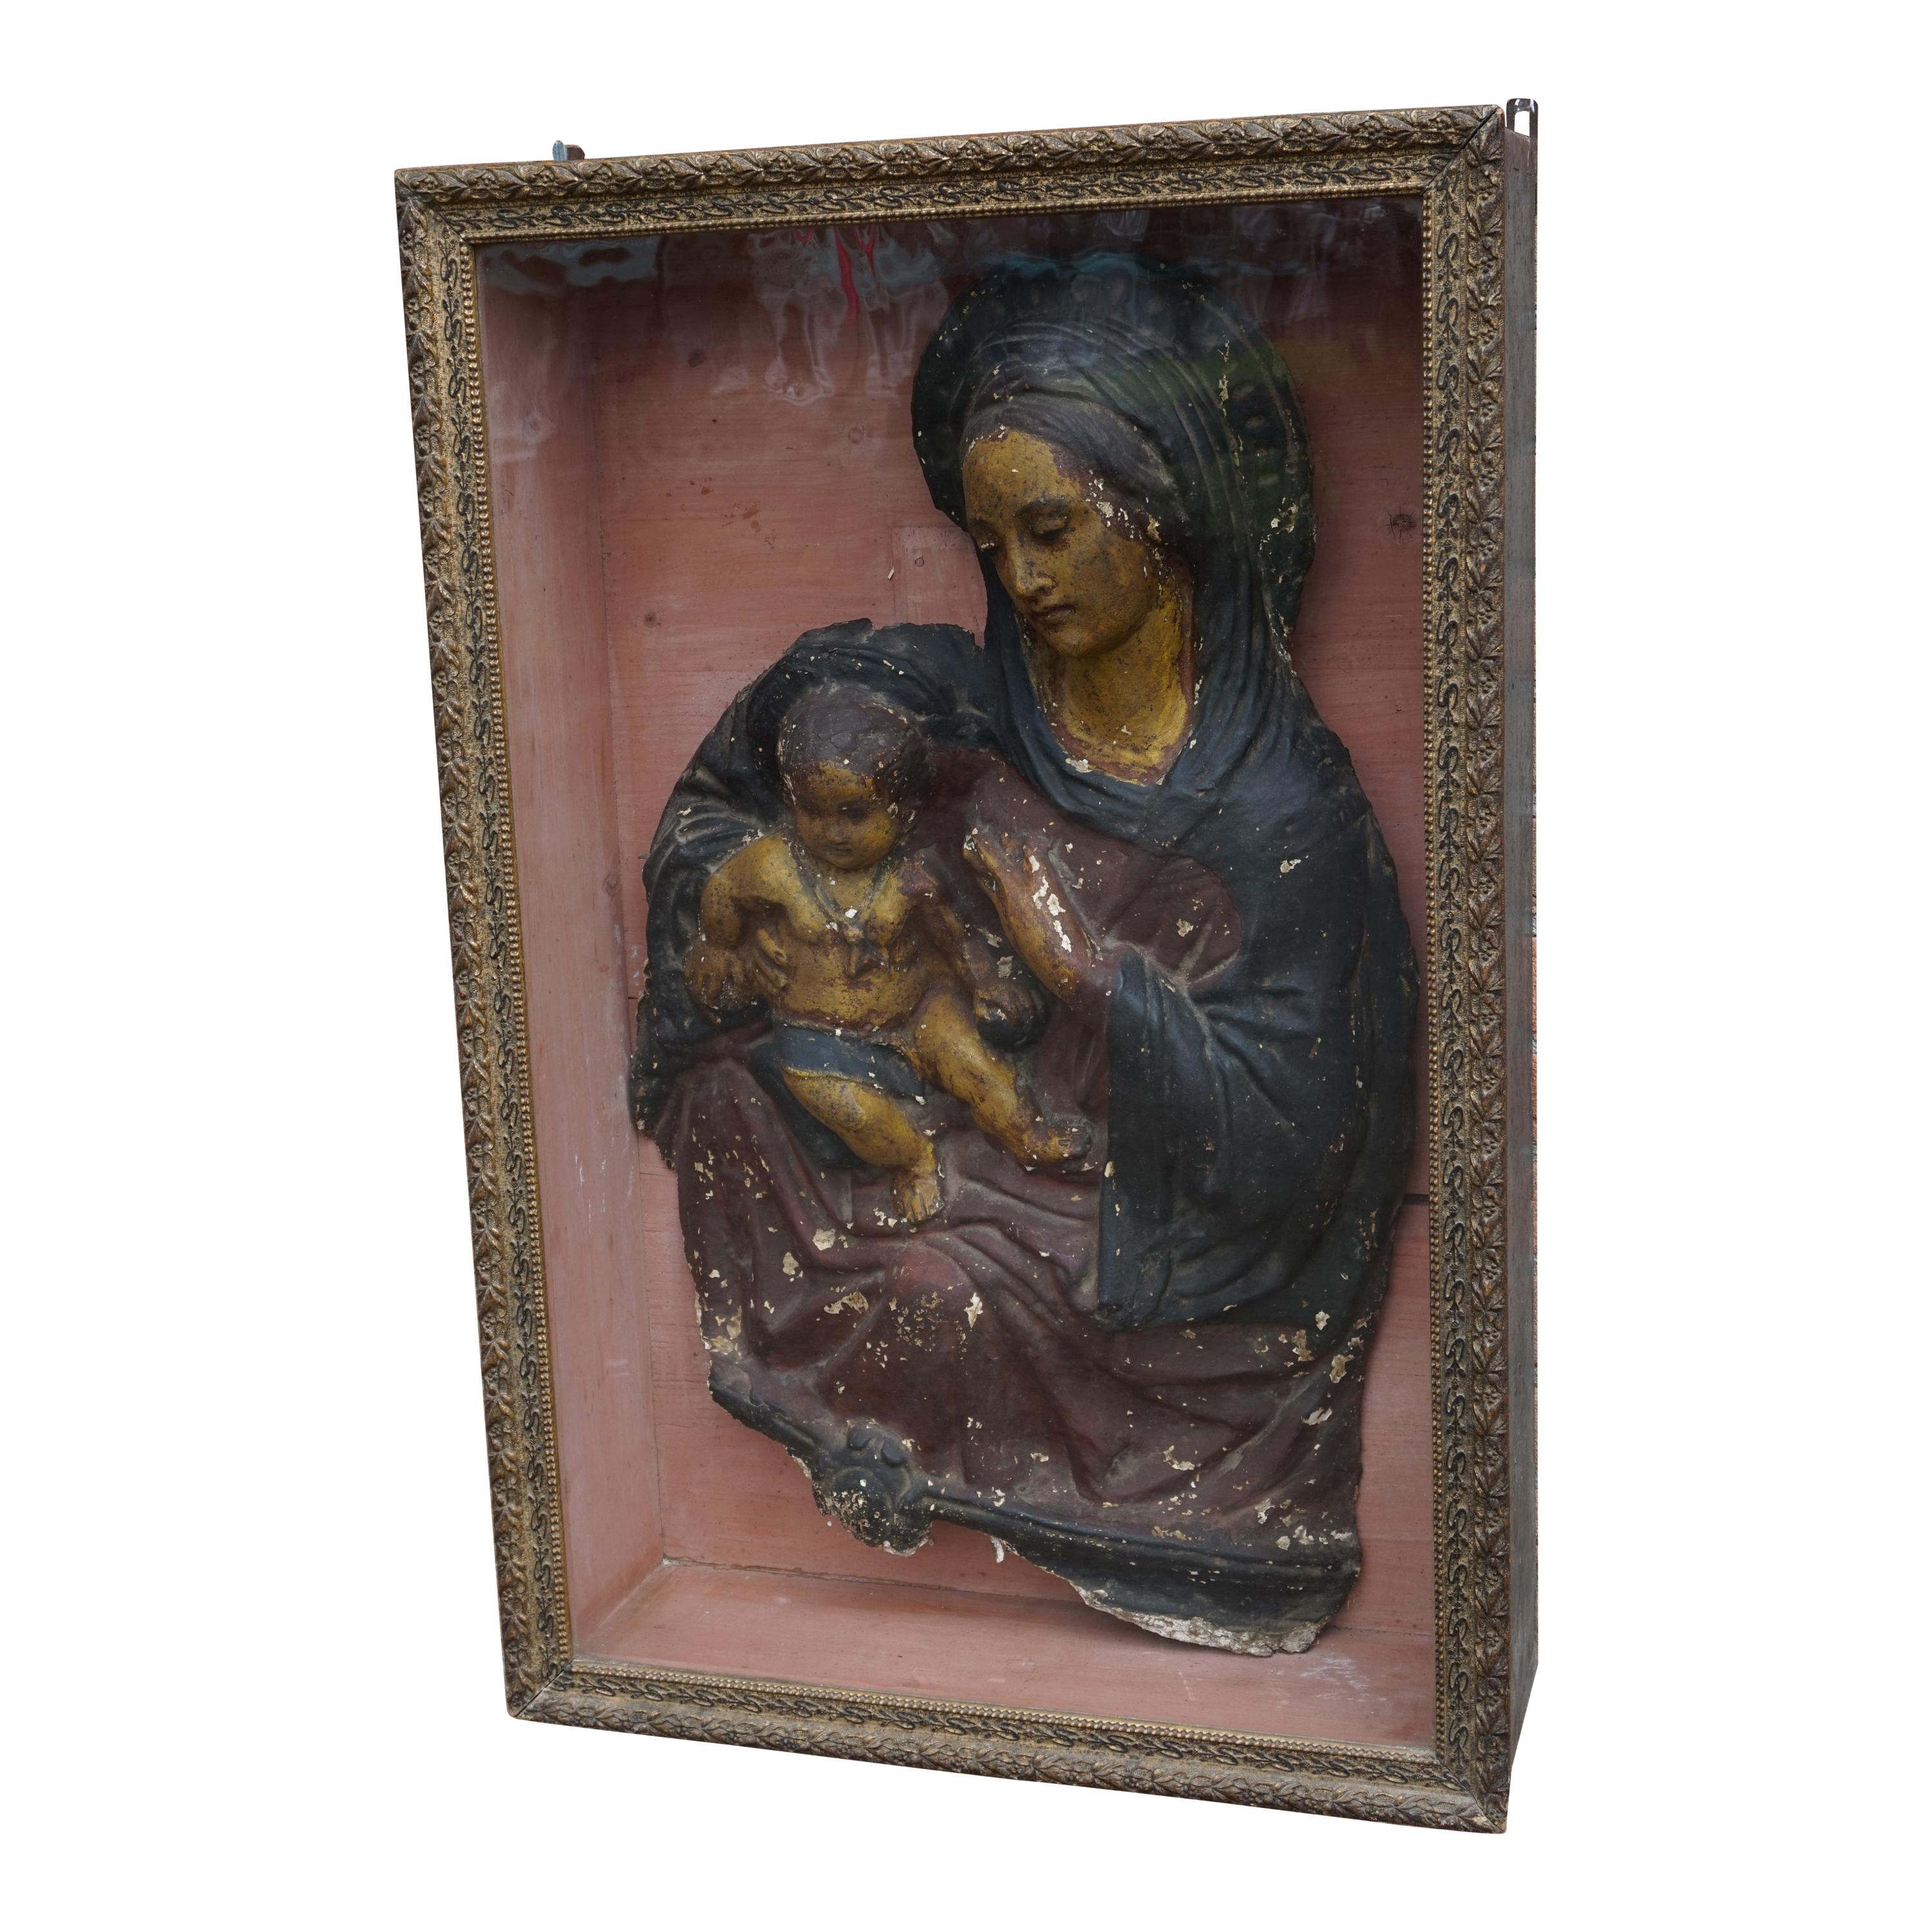 Antique Wall Display Cabinet with a Rare Mary & Child Jesus Sculpture Fragment